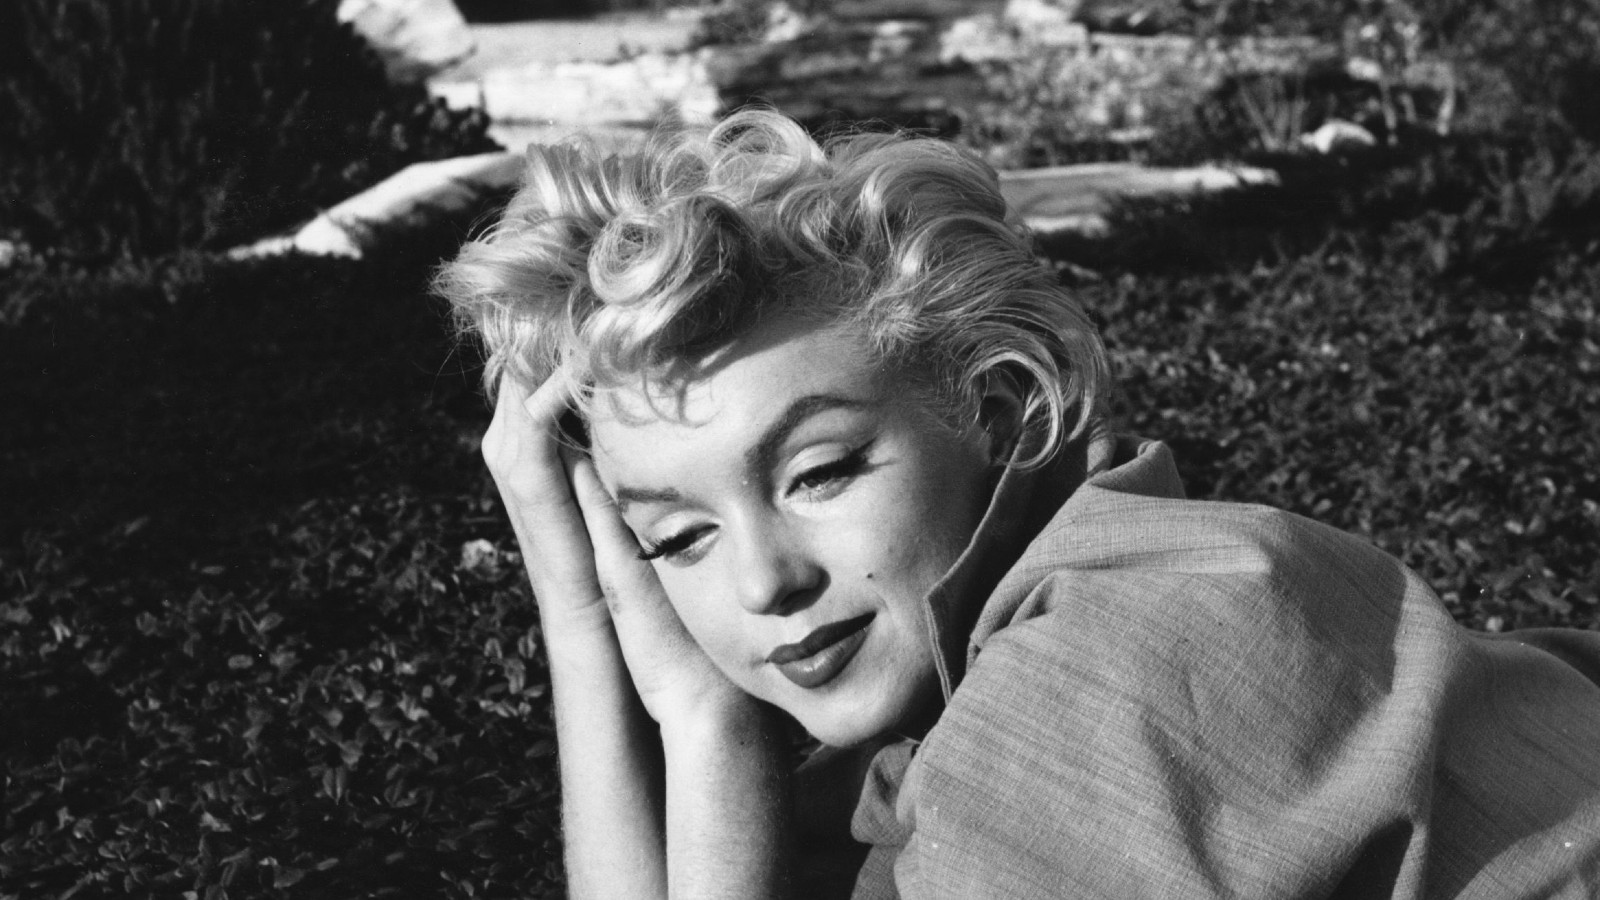 Sixty years since Marilyn Monroe's death: Her passing still surrounded by  mystery